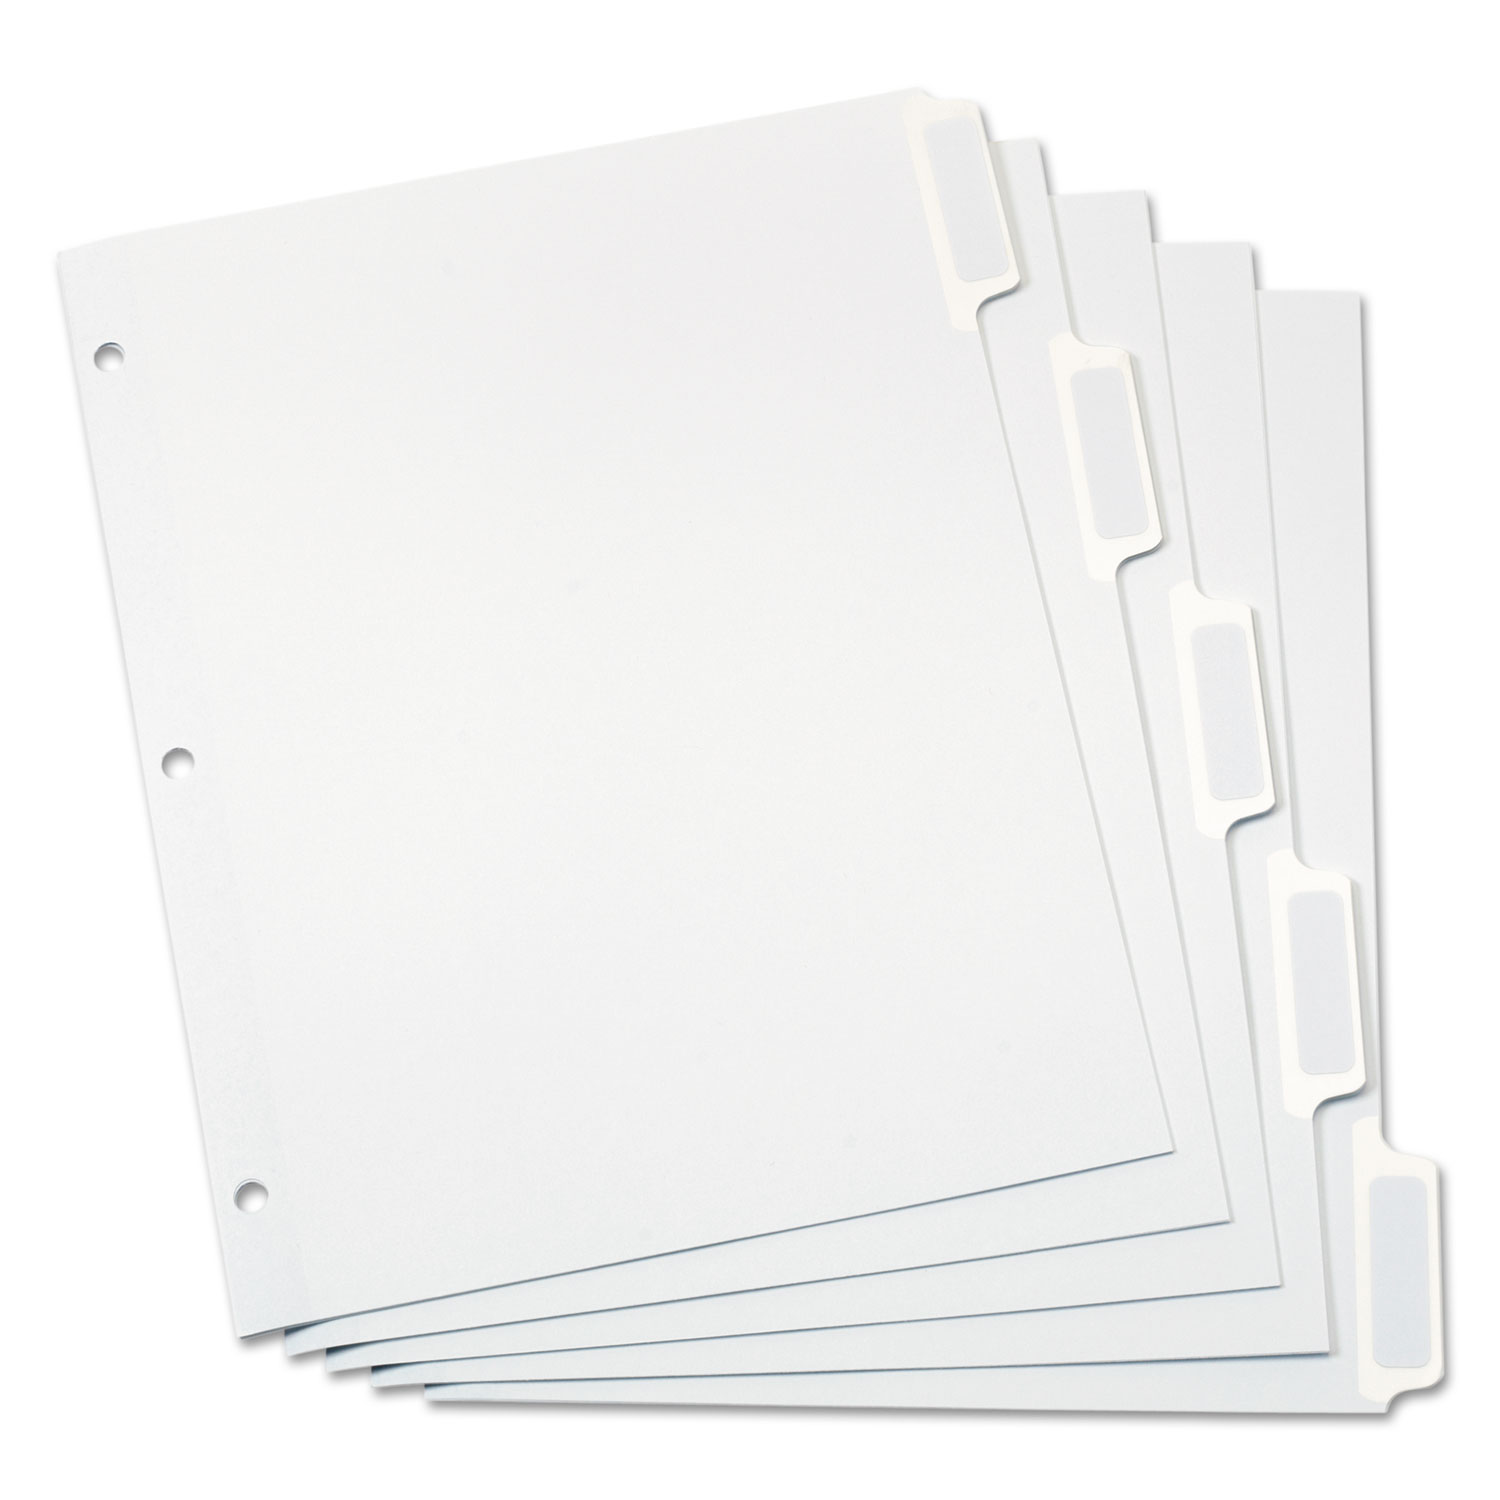  Oxford 11313 Custom Label Tab Dividers with Self-Adhesive Tab Labels, 5-Tab, 11 x 8.5, White, 5 Sets (OXF11313) 